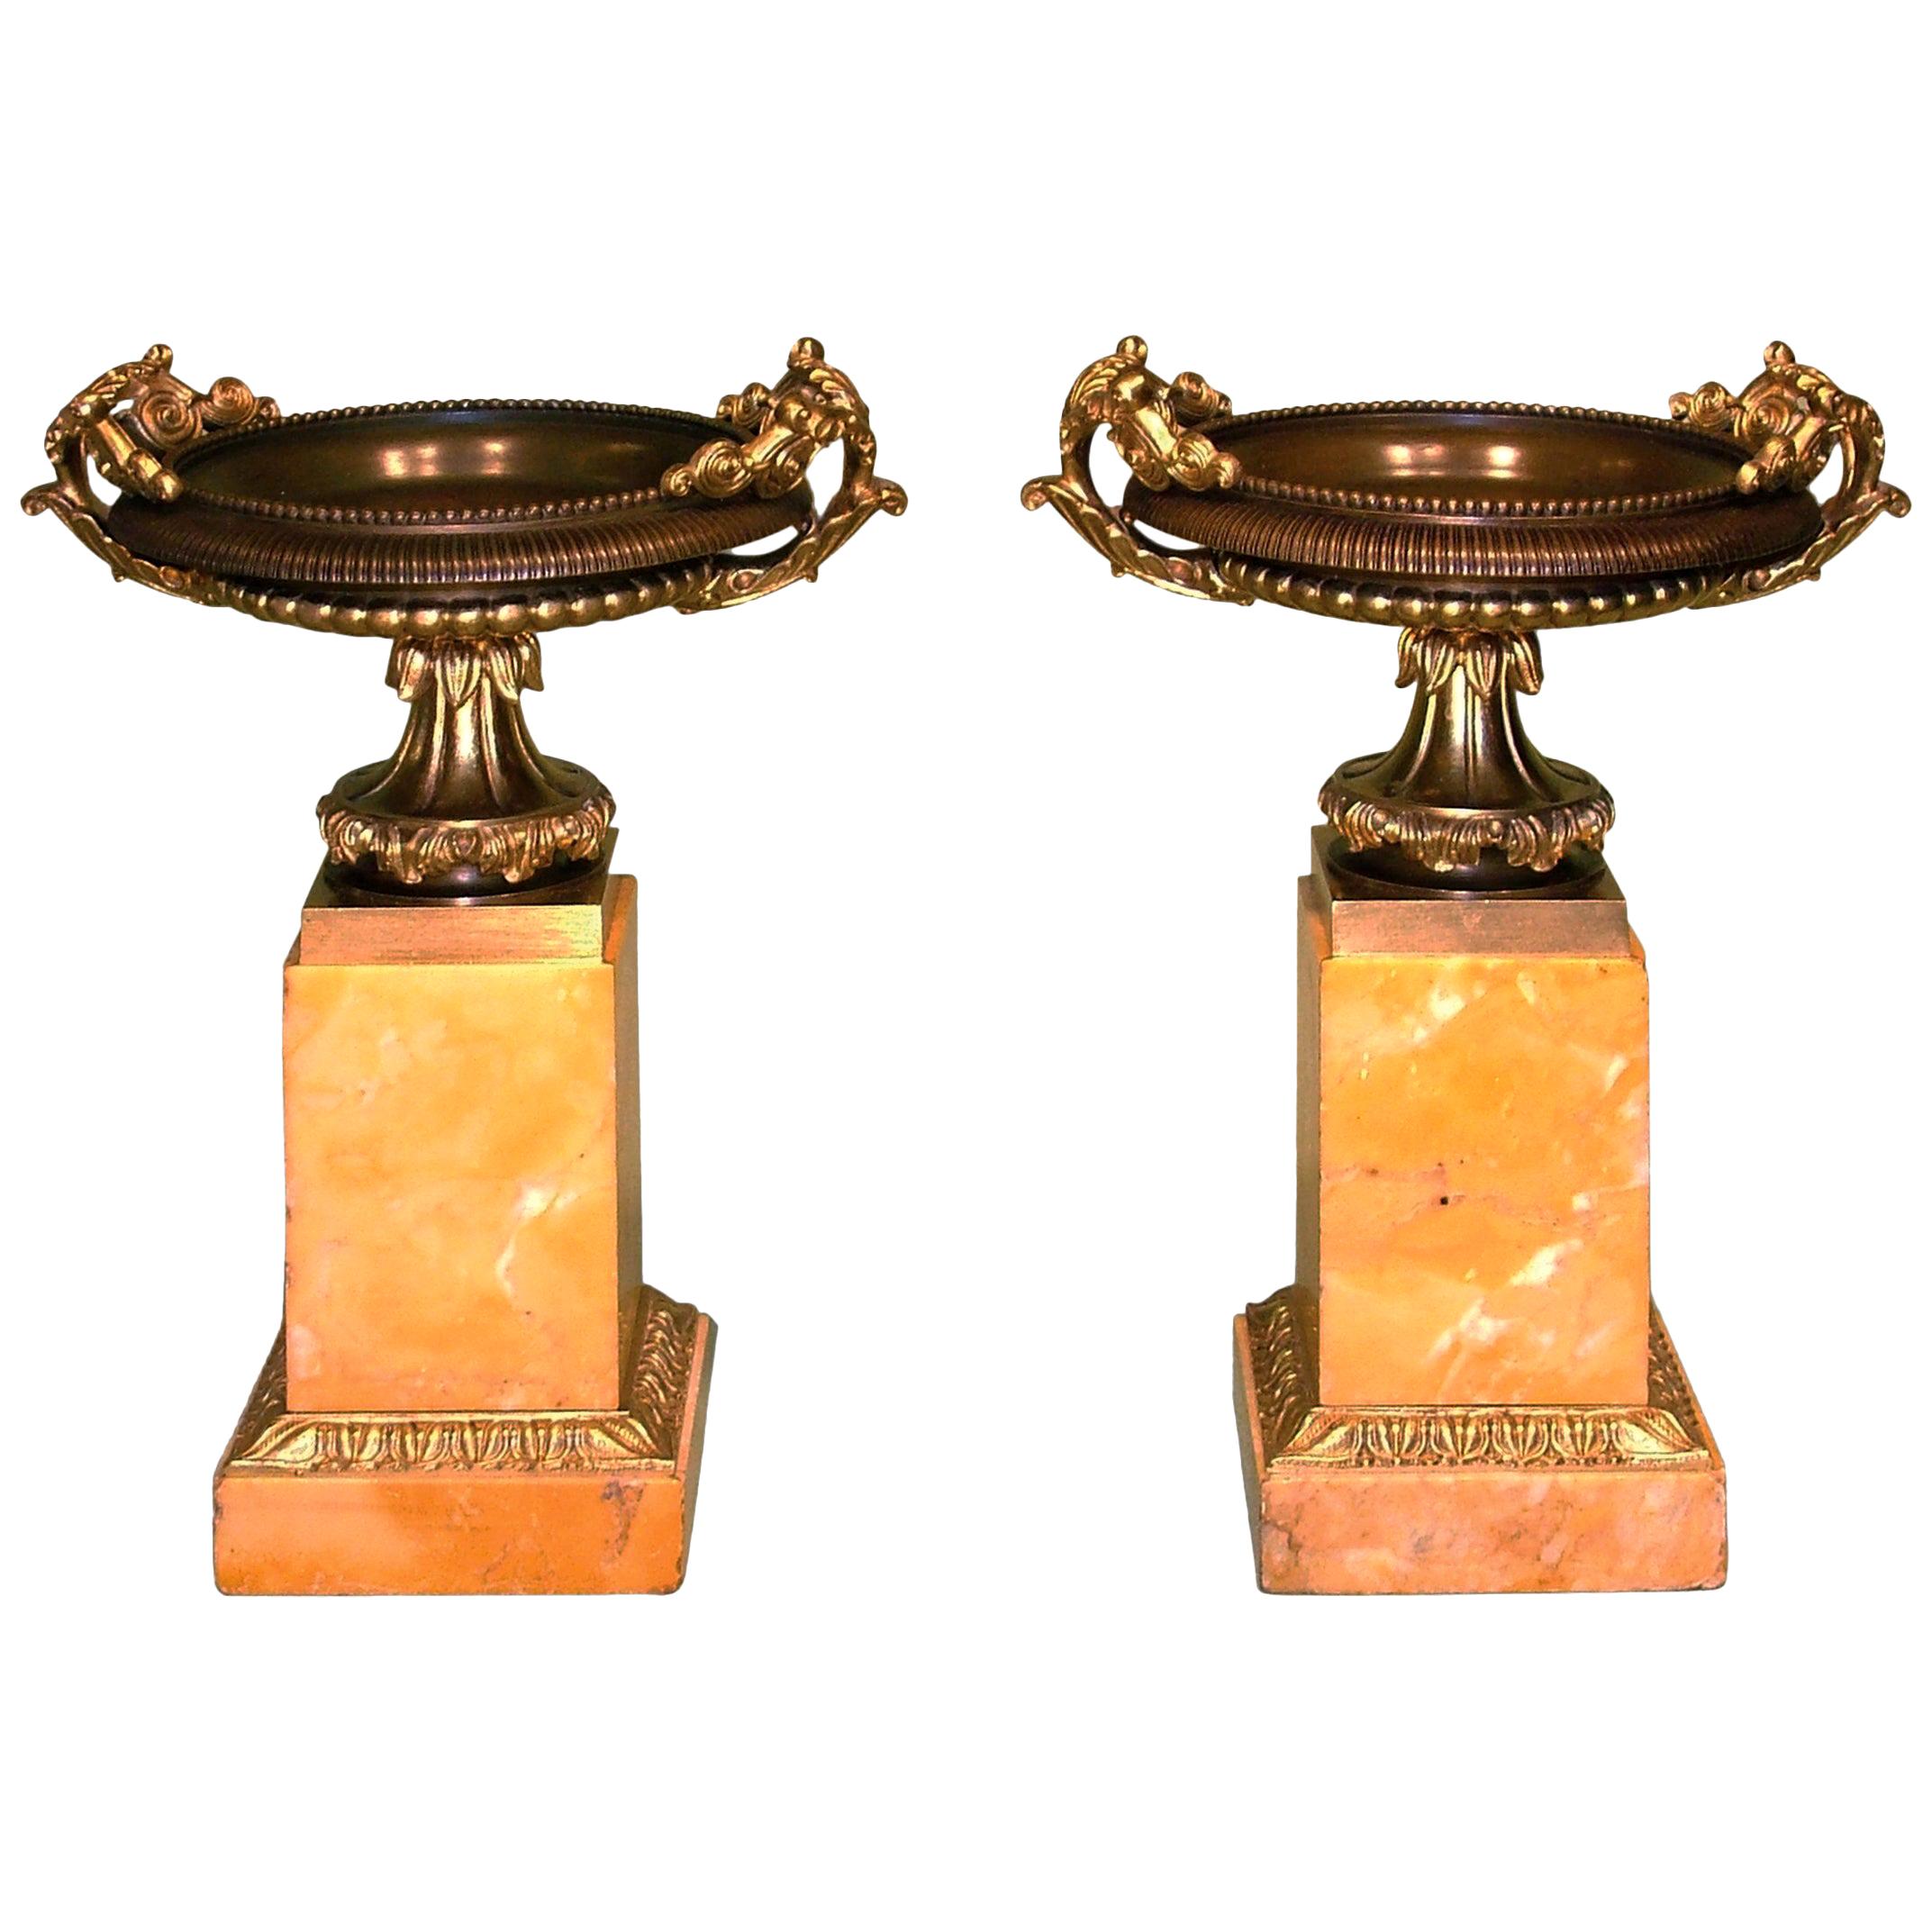 Pair of 19th Century Antique Bronze and Ormolu, Sienna Marble Tazzas